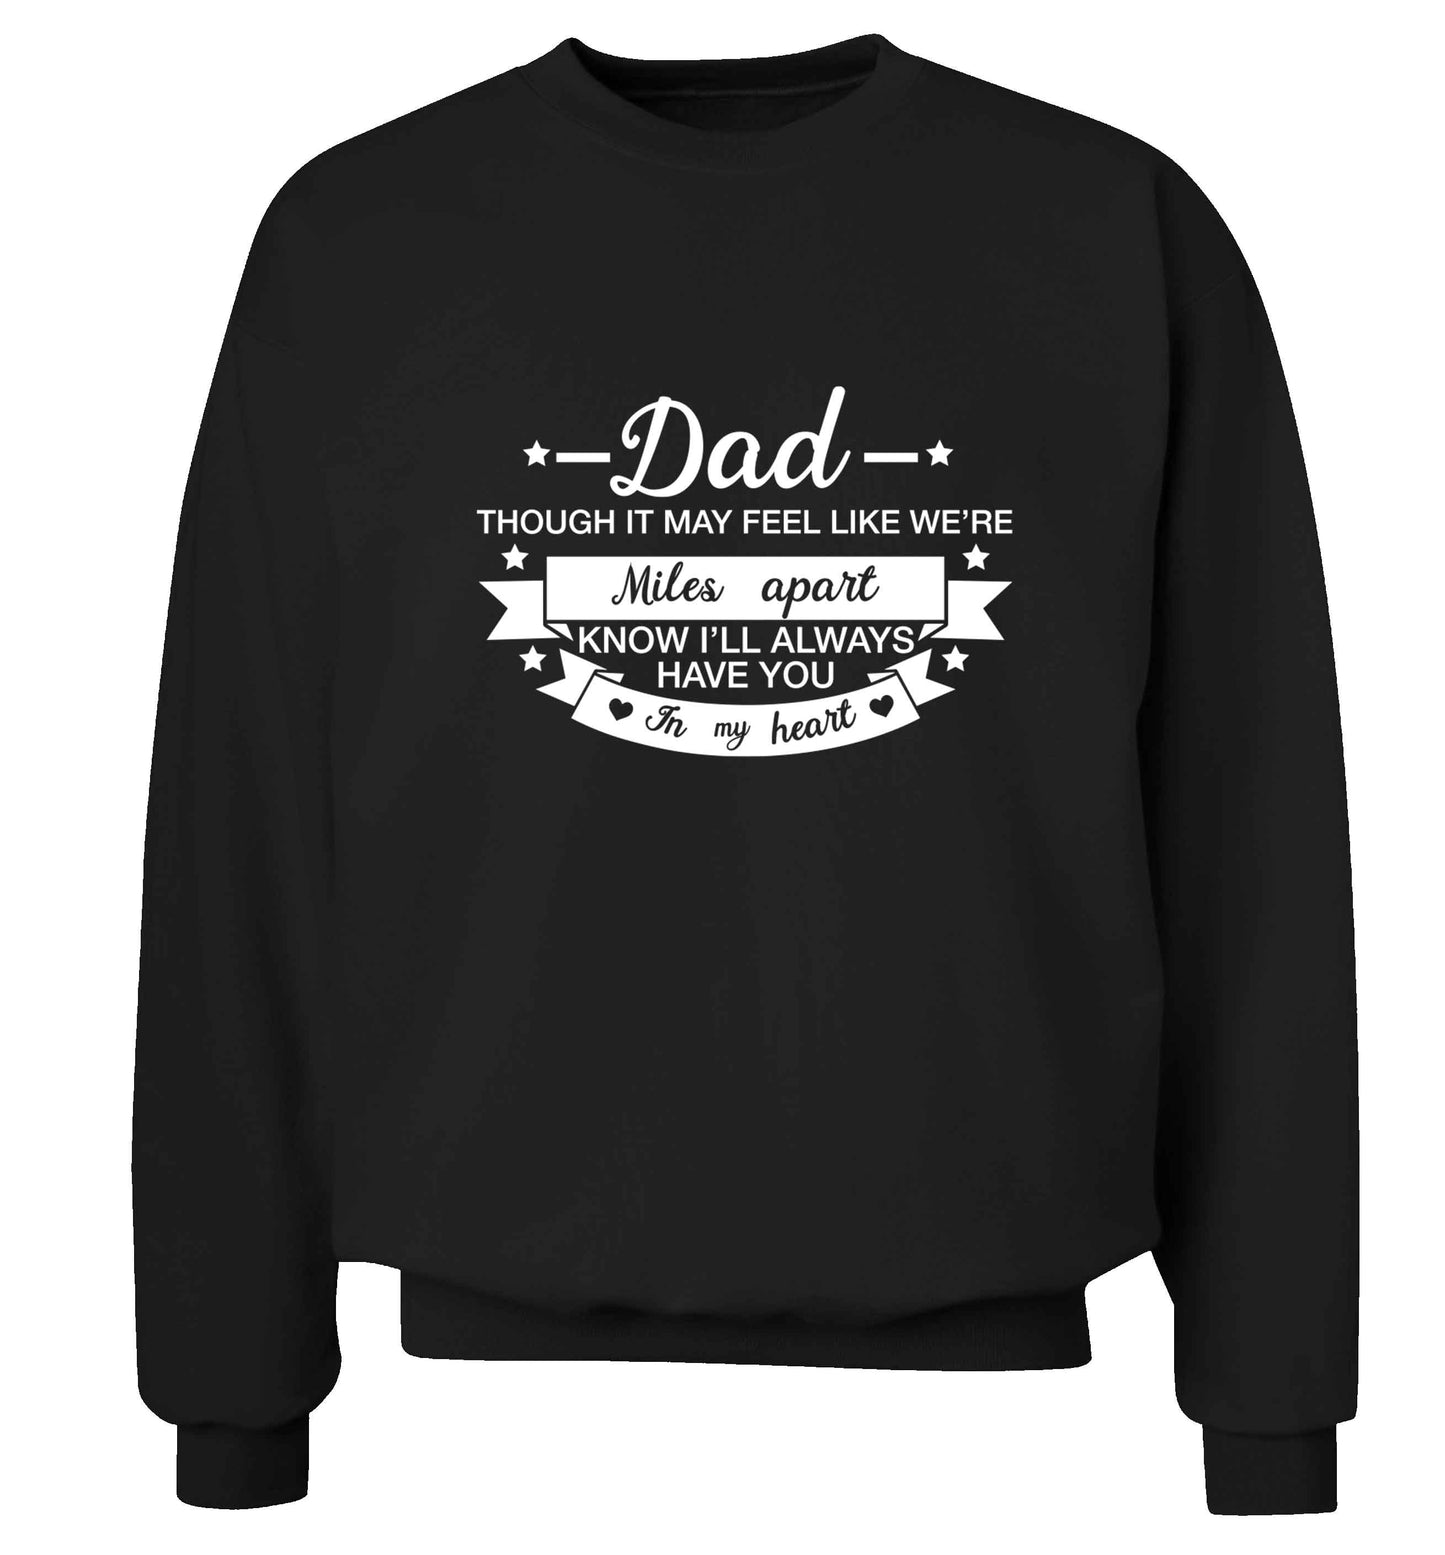 Dad though it may feel like we're miles apart know I'll always have you in my heart adult's unisex black sweater 2XL